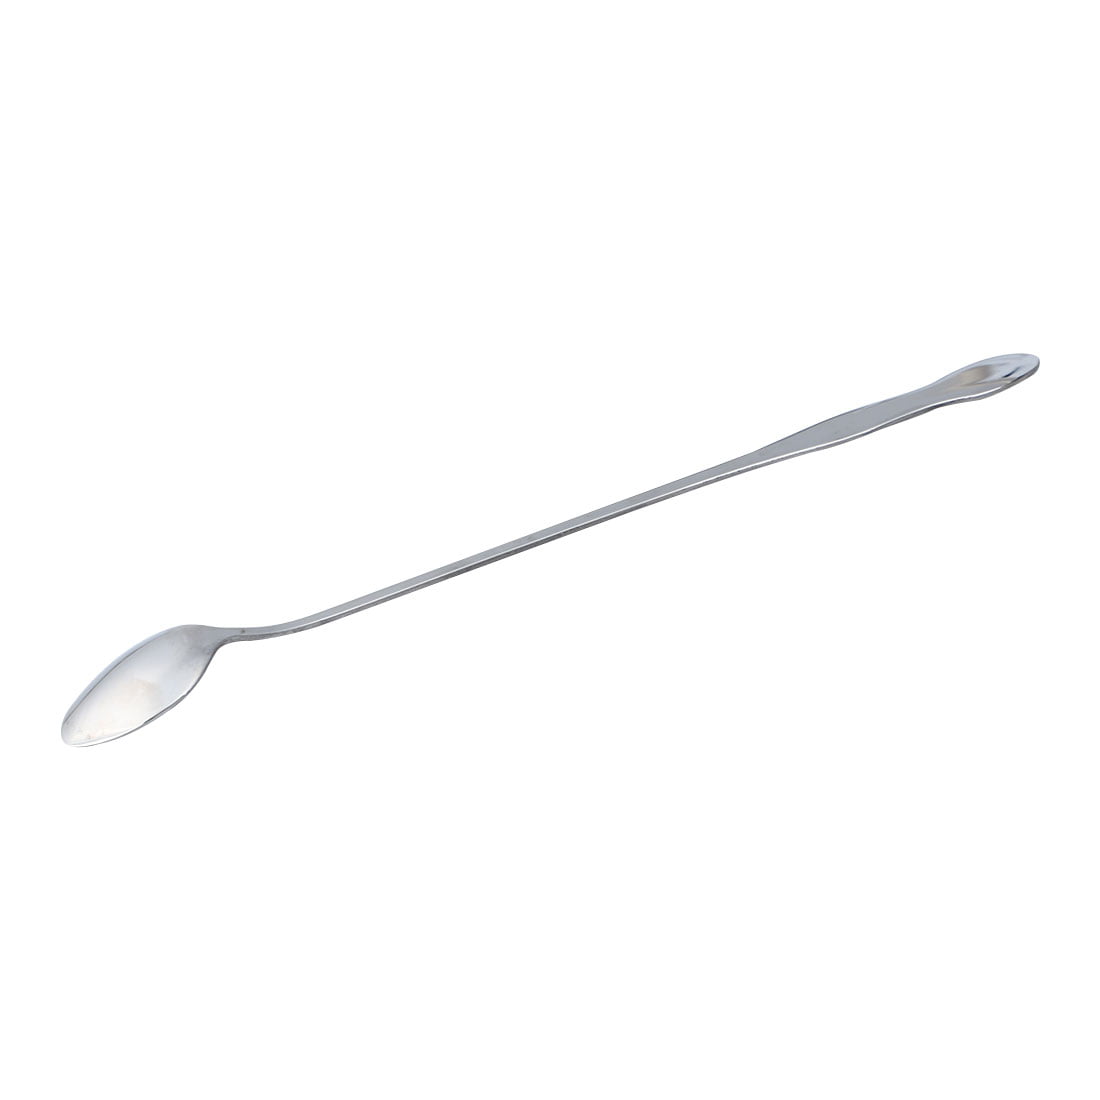 Ecurson Stainless Steel Spoon Creative Square Long Handle Mixing Spoons,Coffee Tea Mixing Spoon for Drinking Eating Stirring 